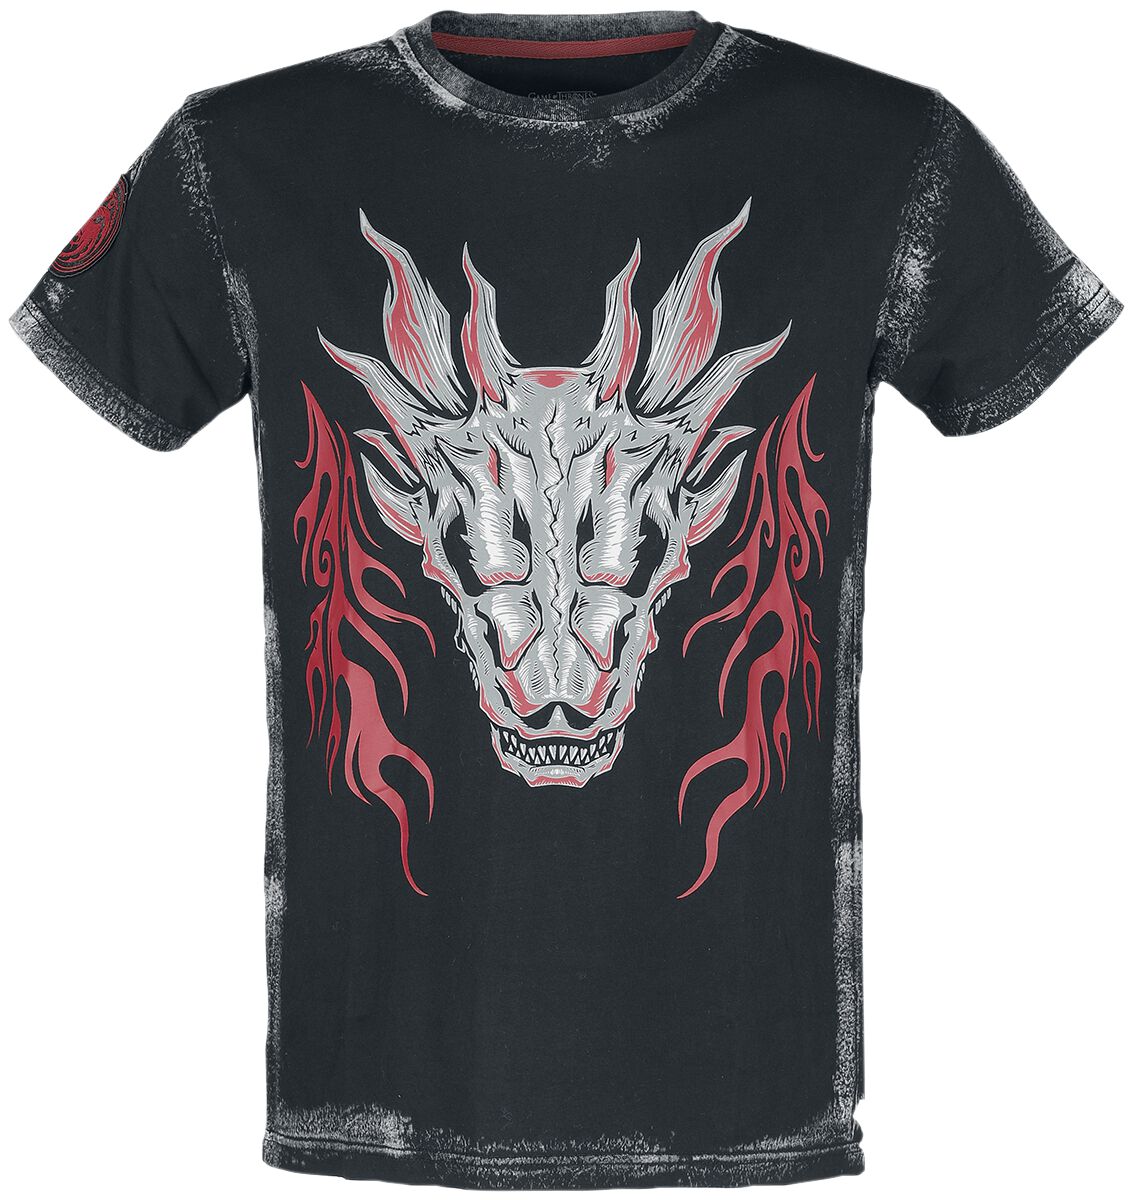 Game of Thrones House of the Dragon T-Shirt black